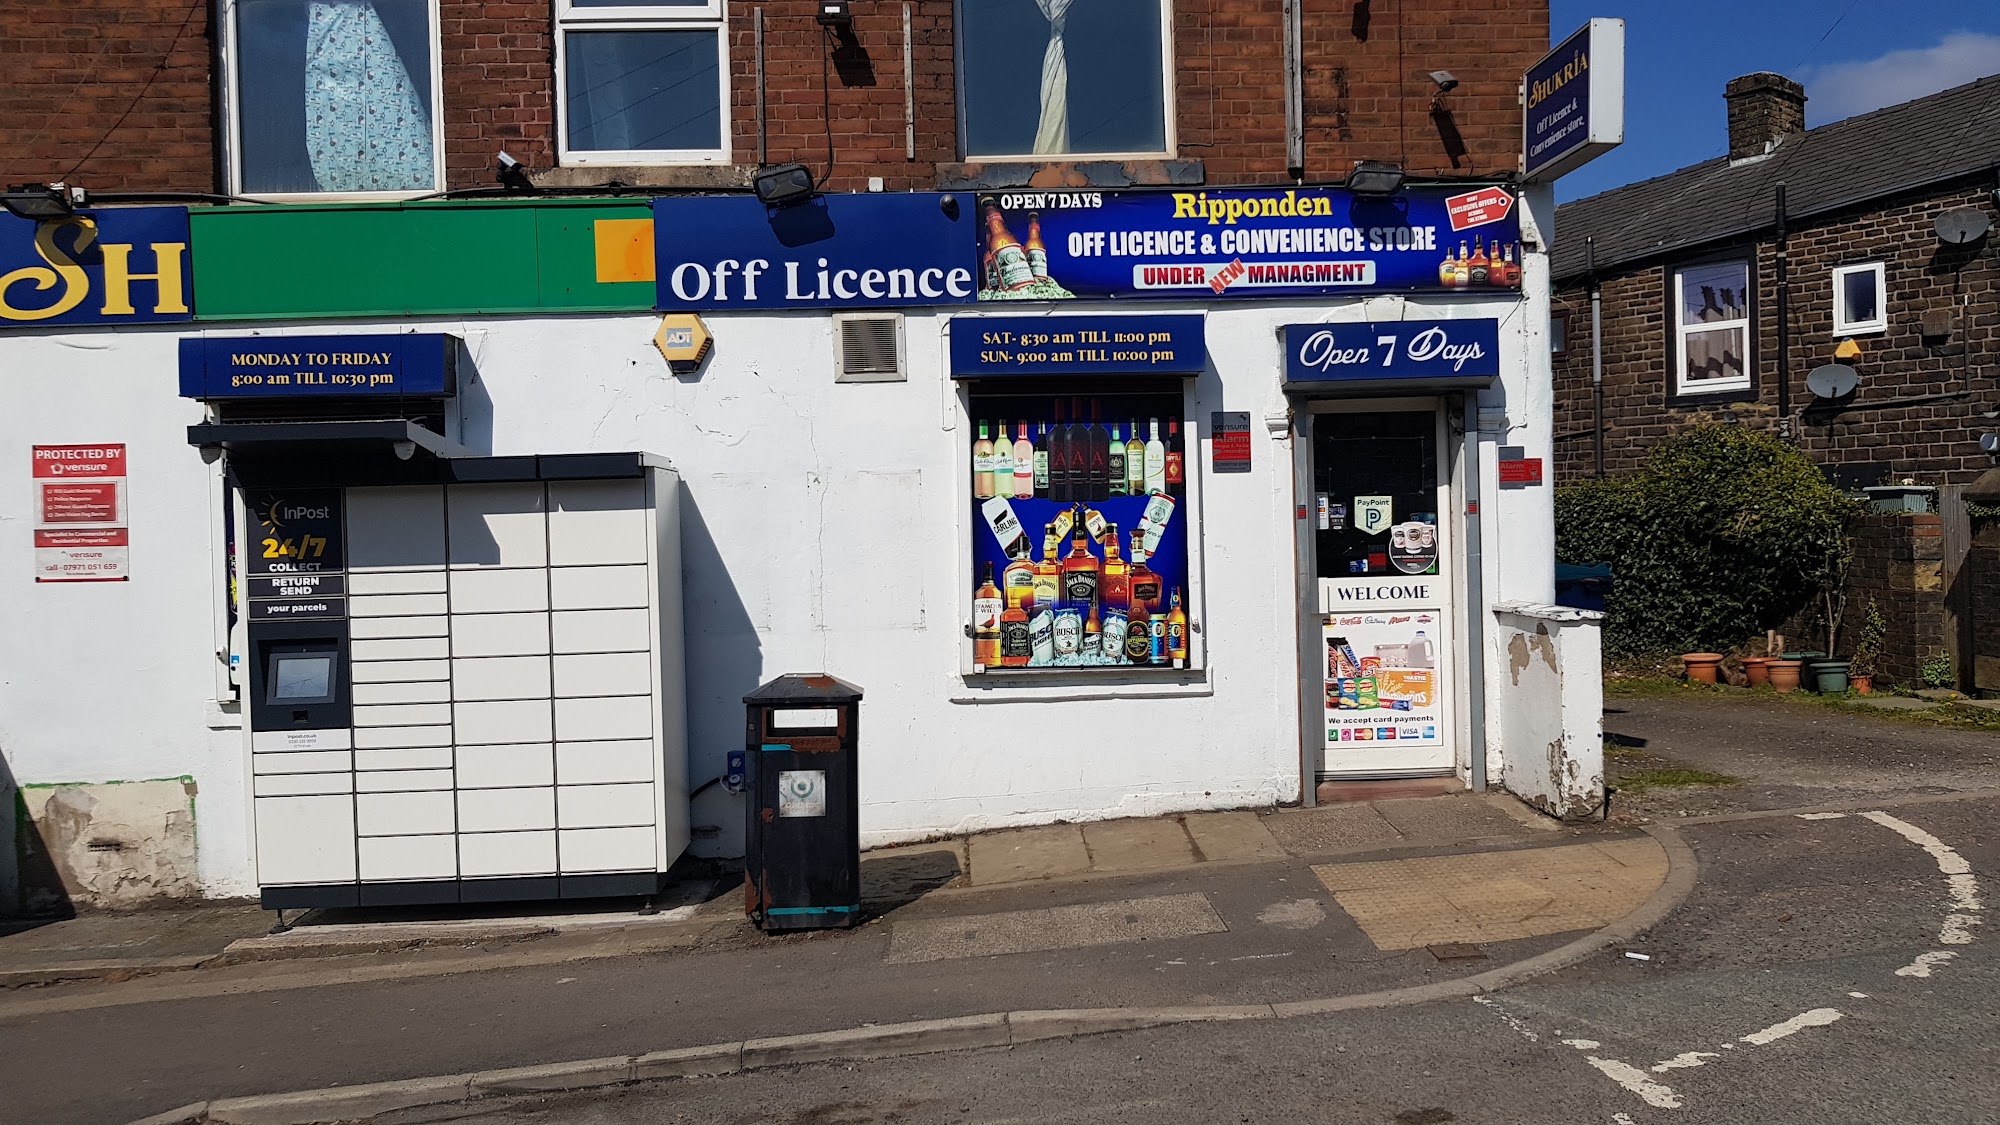 RIPPONDEN OFF LICENCE & CONVIENCE STORE